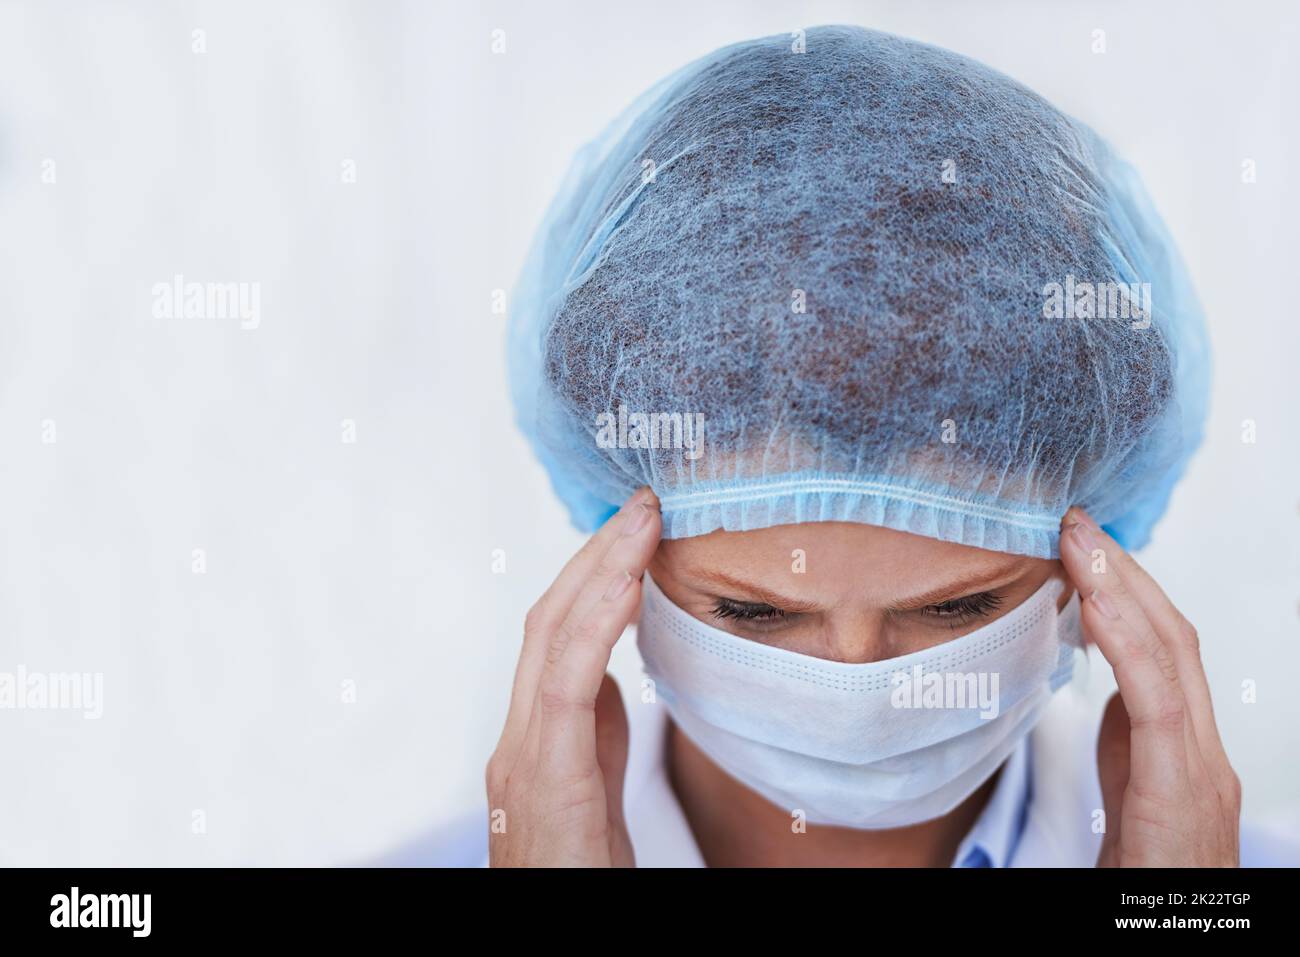 Staying focused for the big operation ahead. a female surgeon wearing a surgical cap and mask. Stock Photo